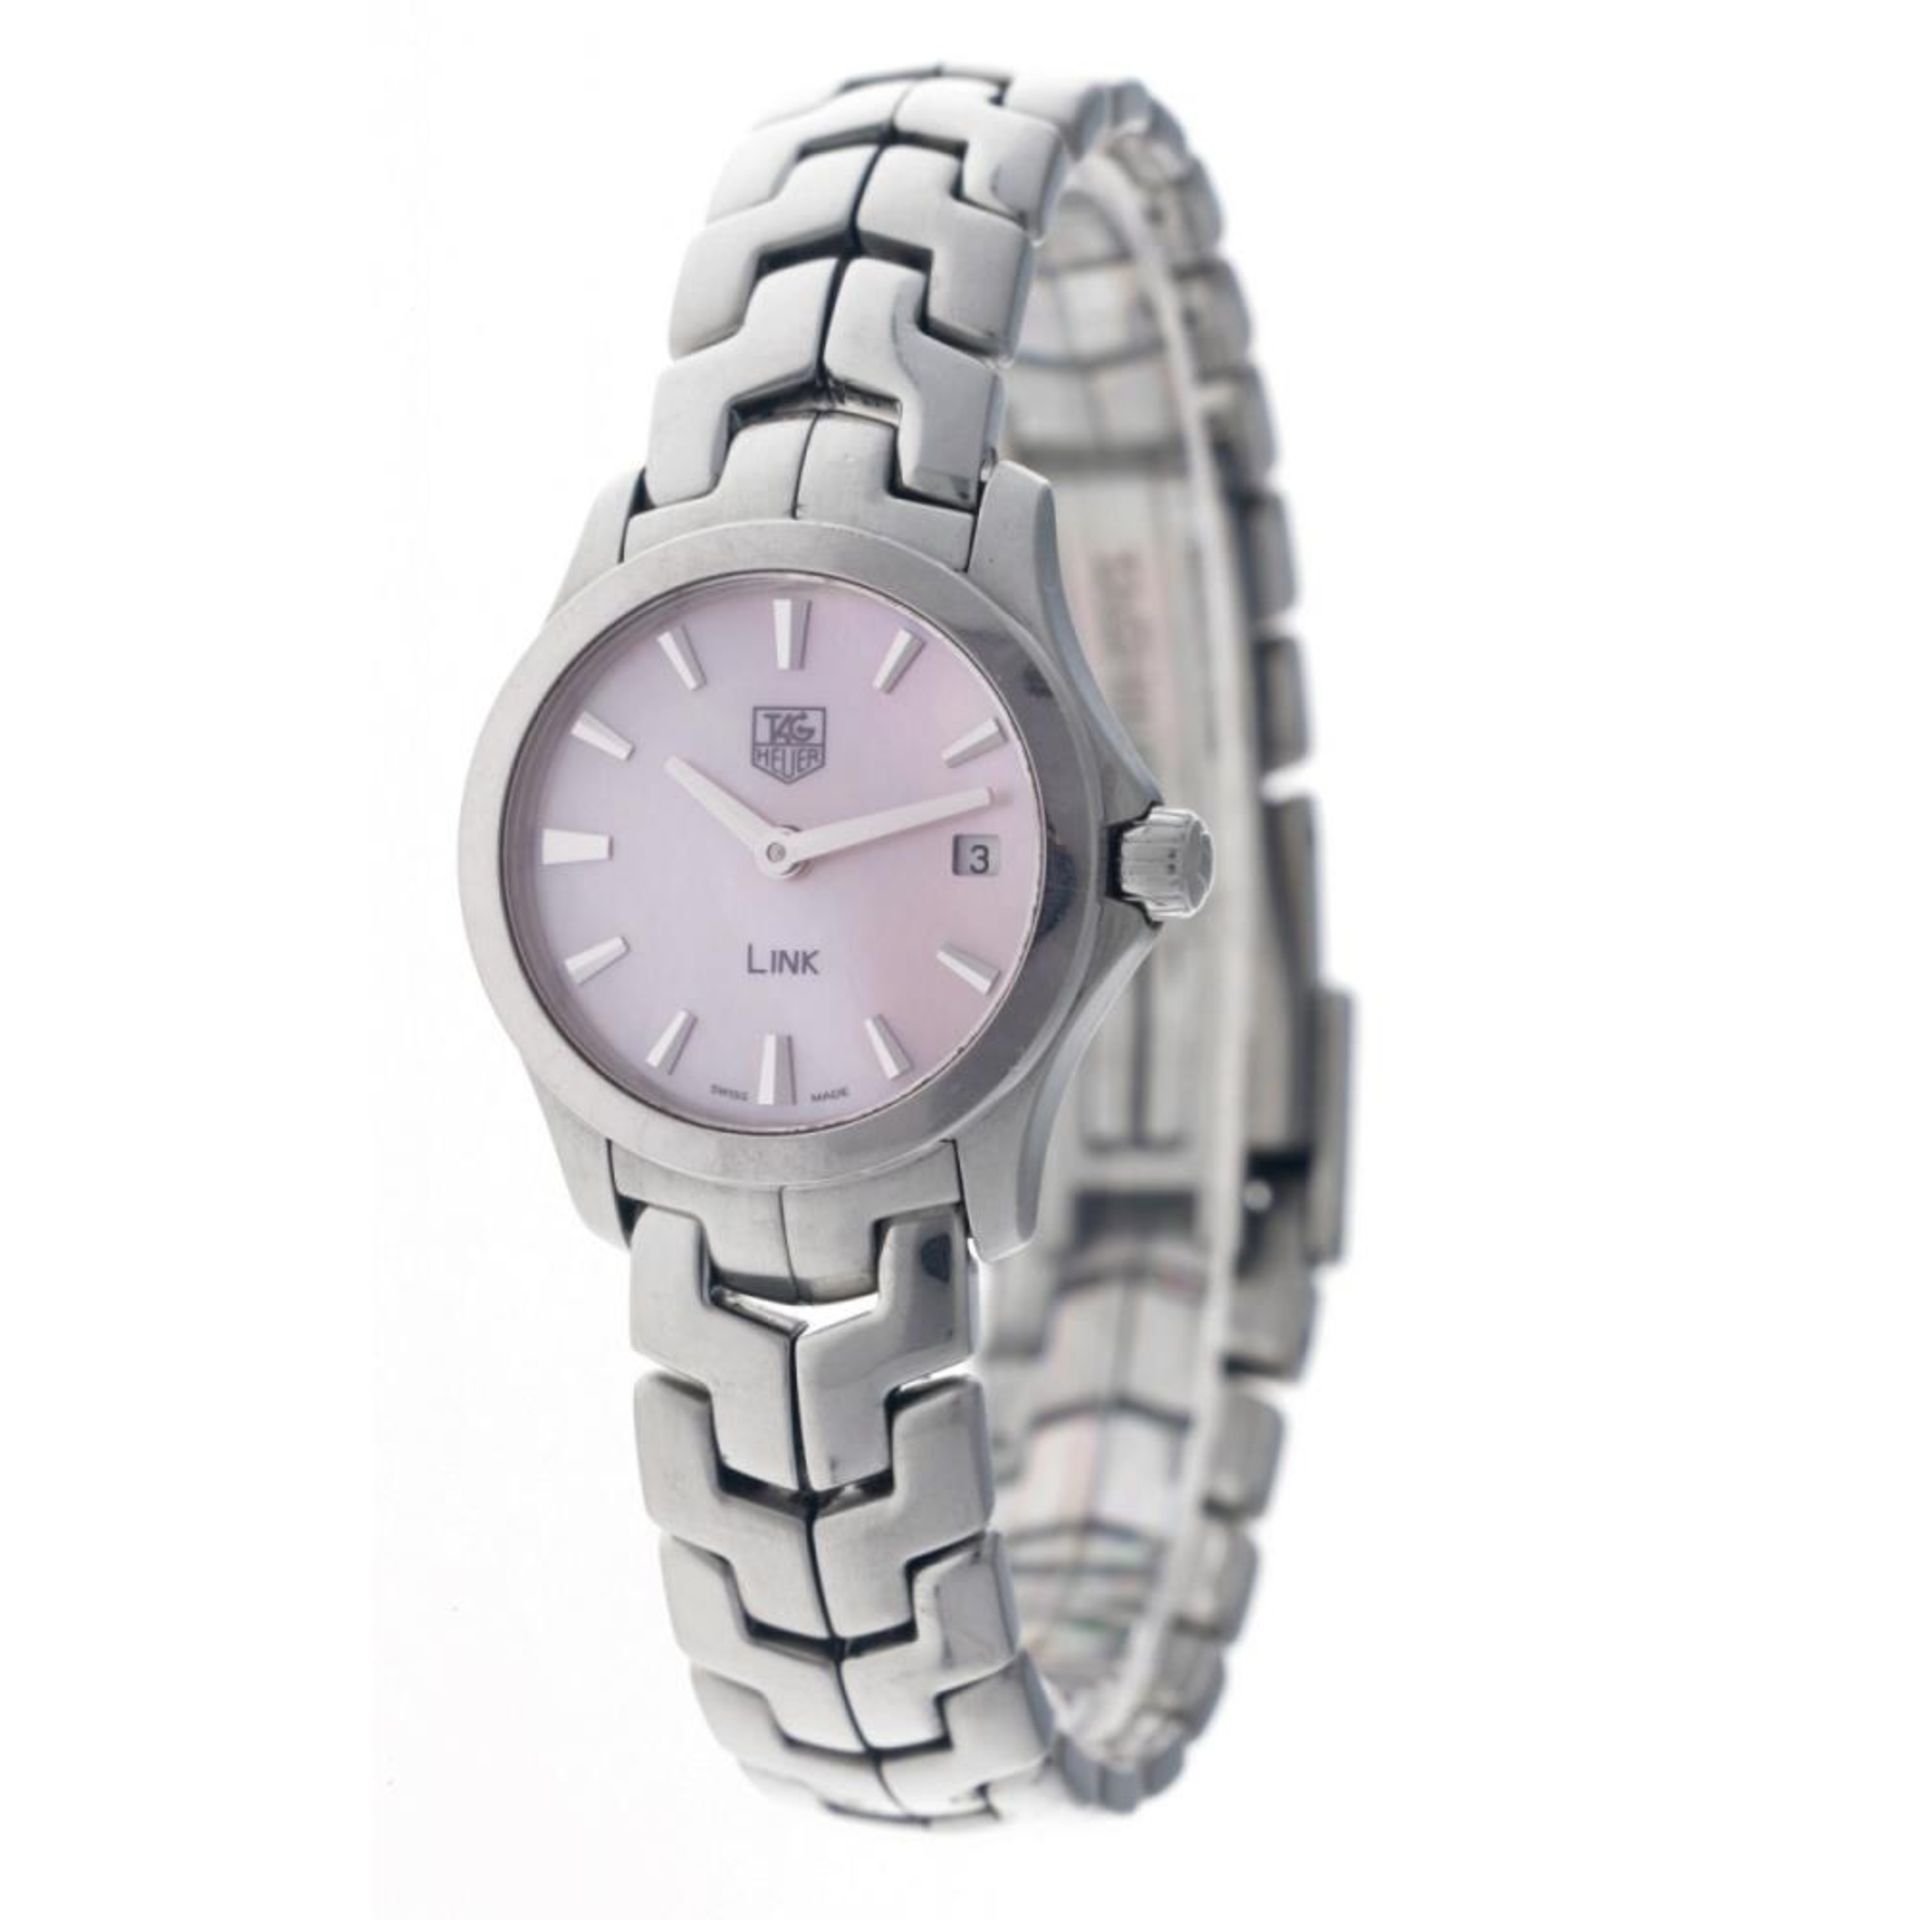 TAG Heuer Link WJF1412 - Pink Mother of Pearl - Ladies watch - approx. 2013. - Image 3 of 10